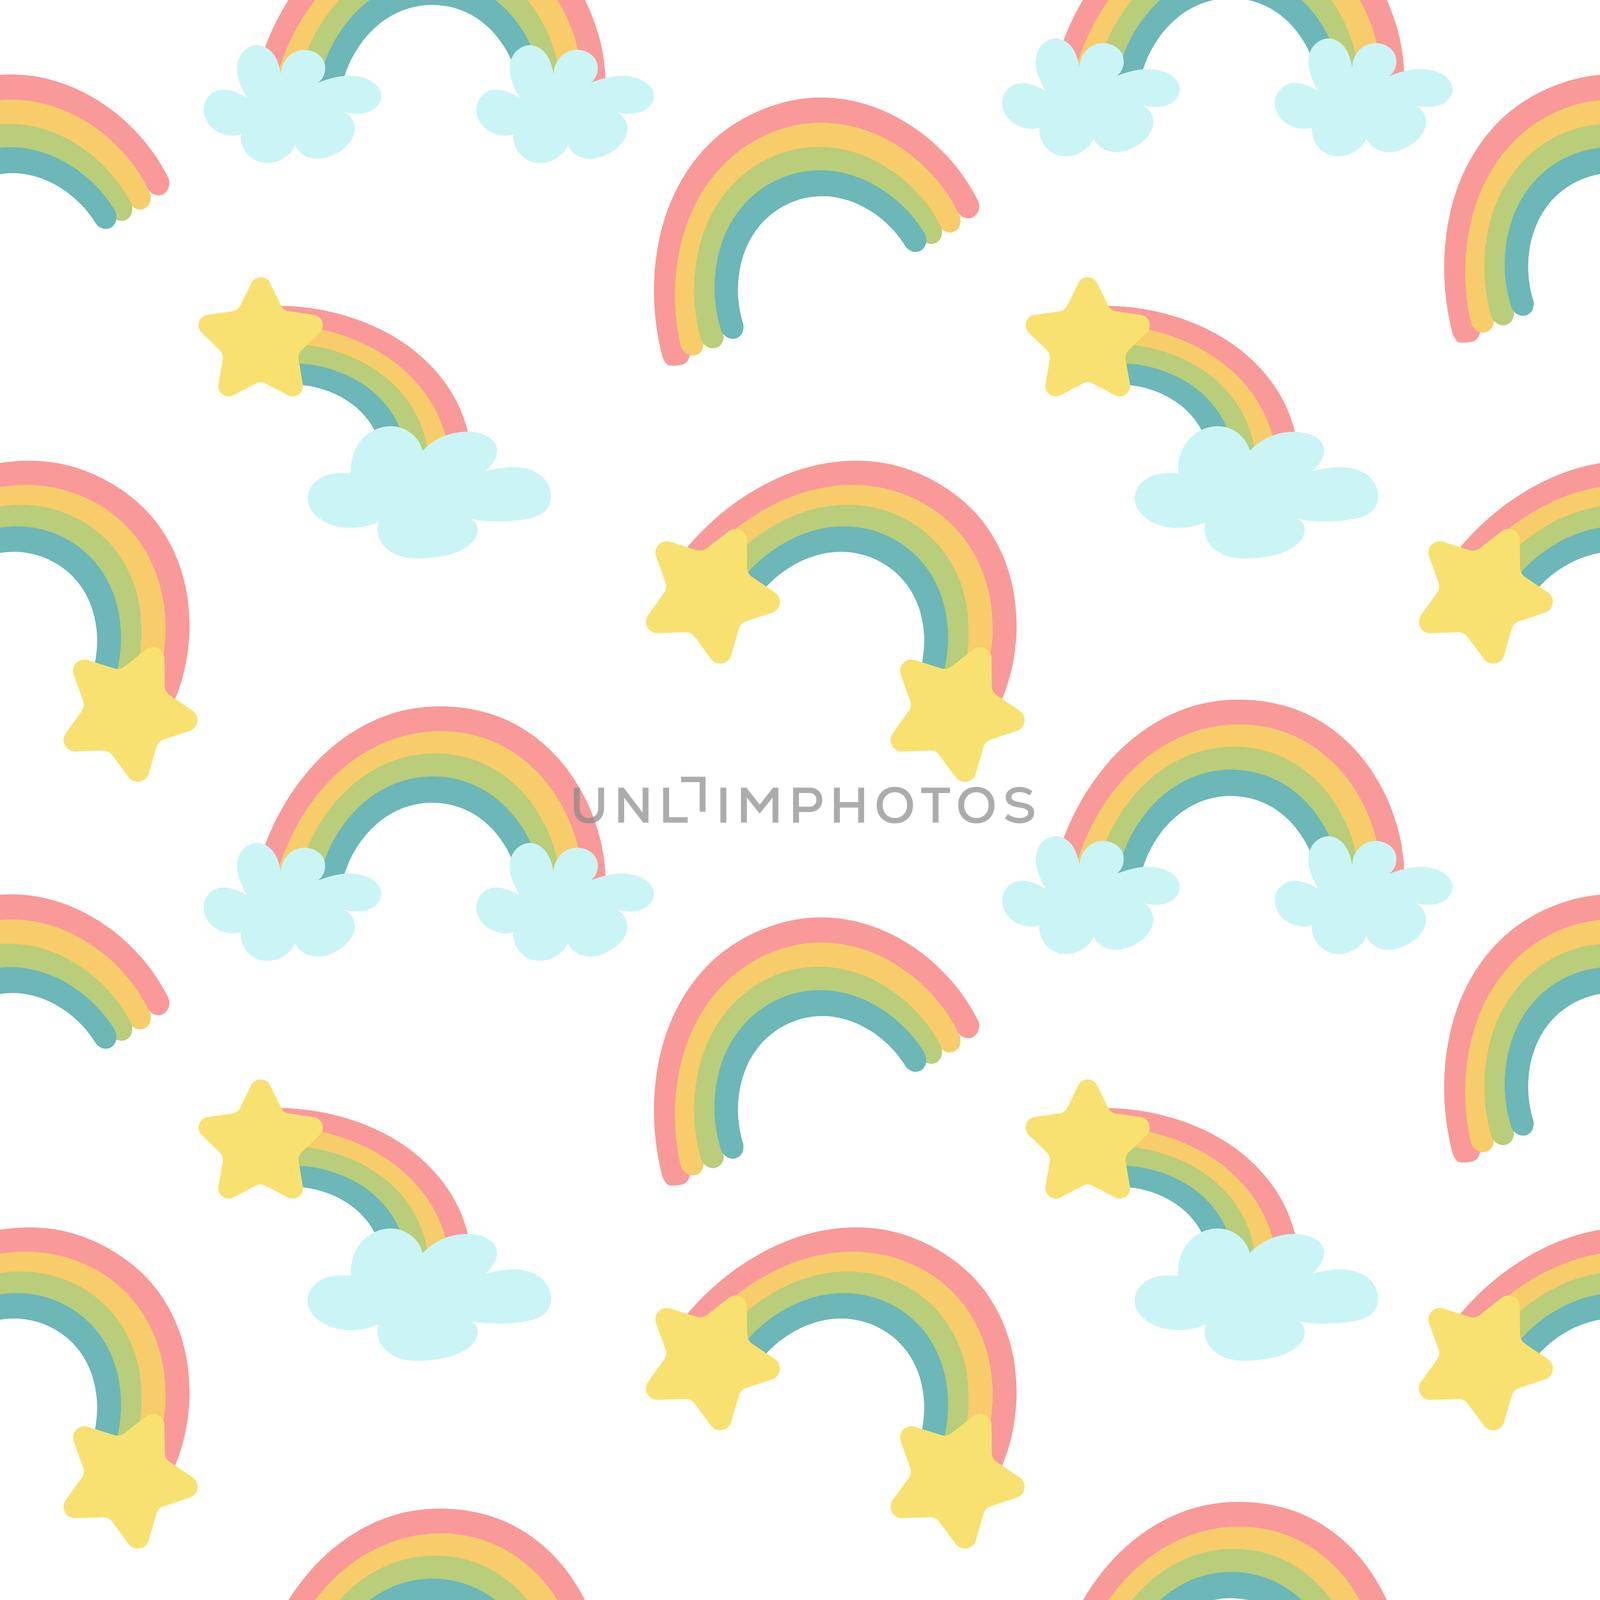 Pastel rainbow and stars seamless pattern on white background. Pattern for kids